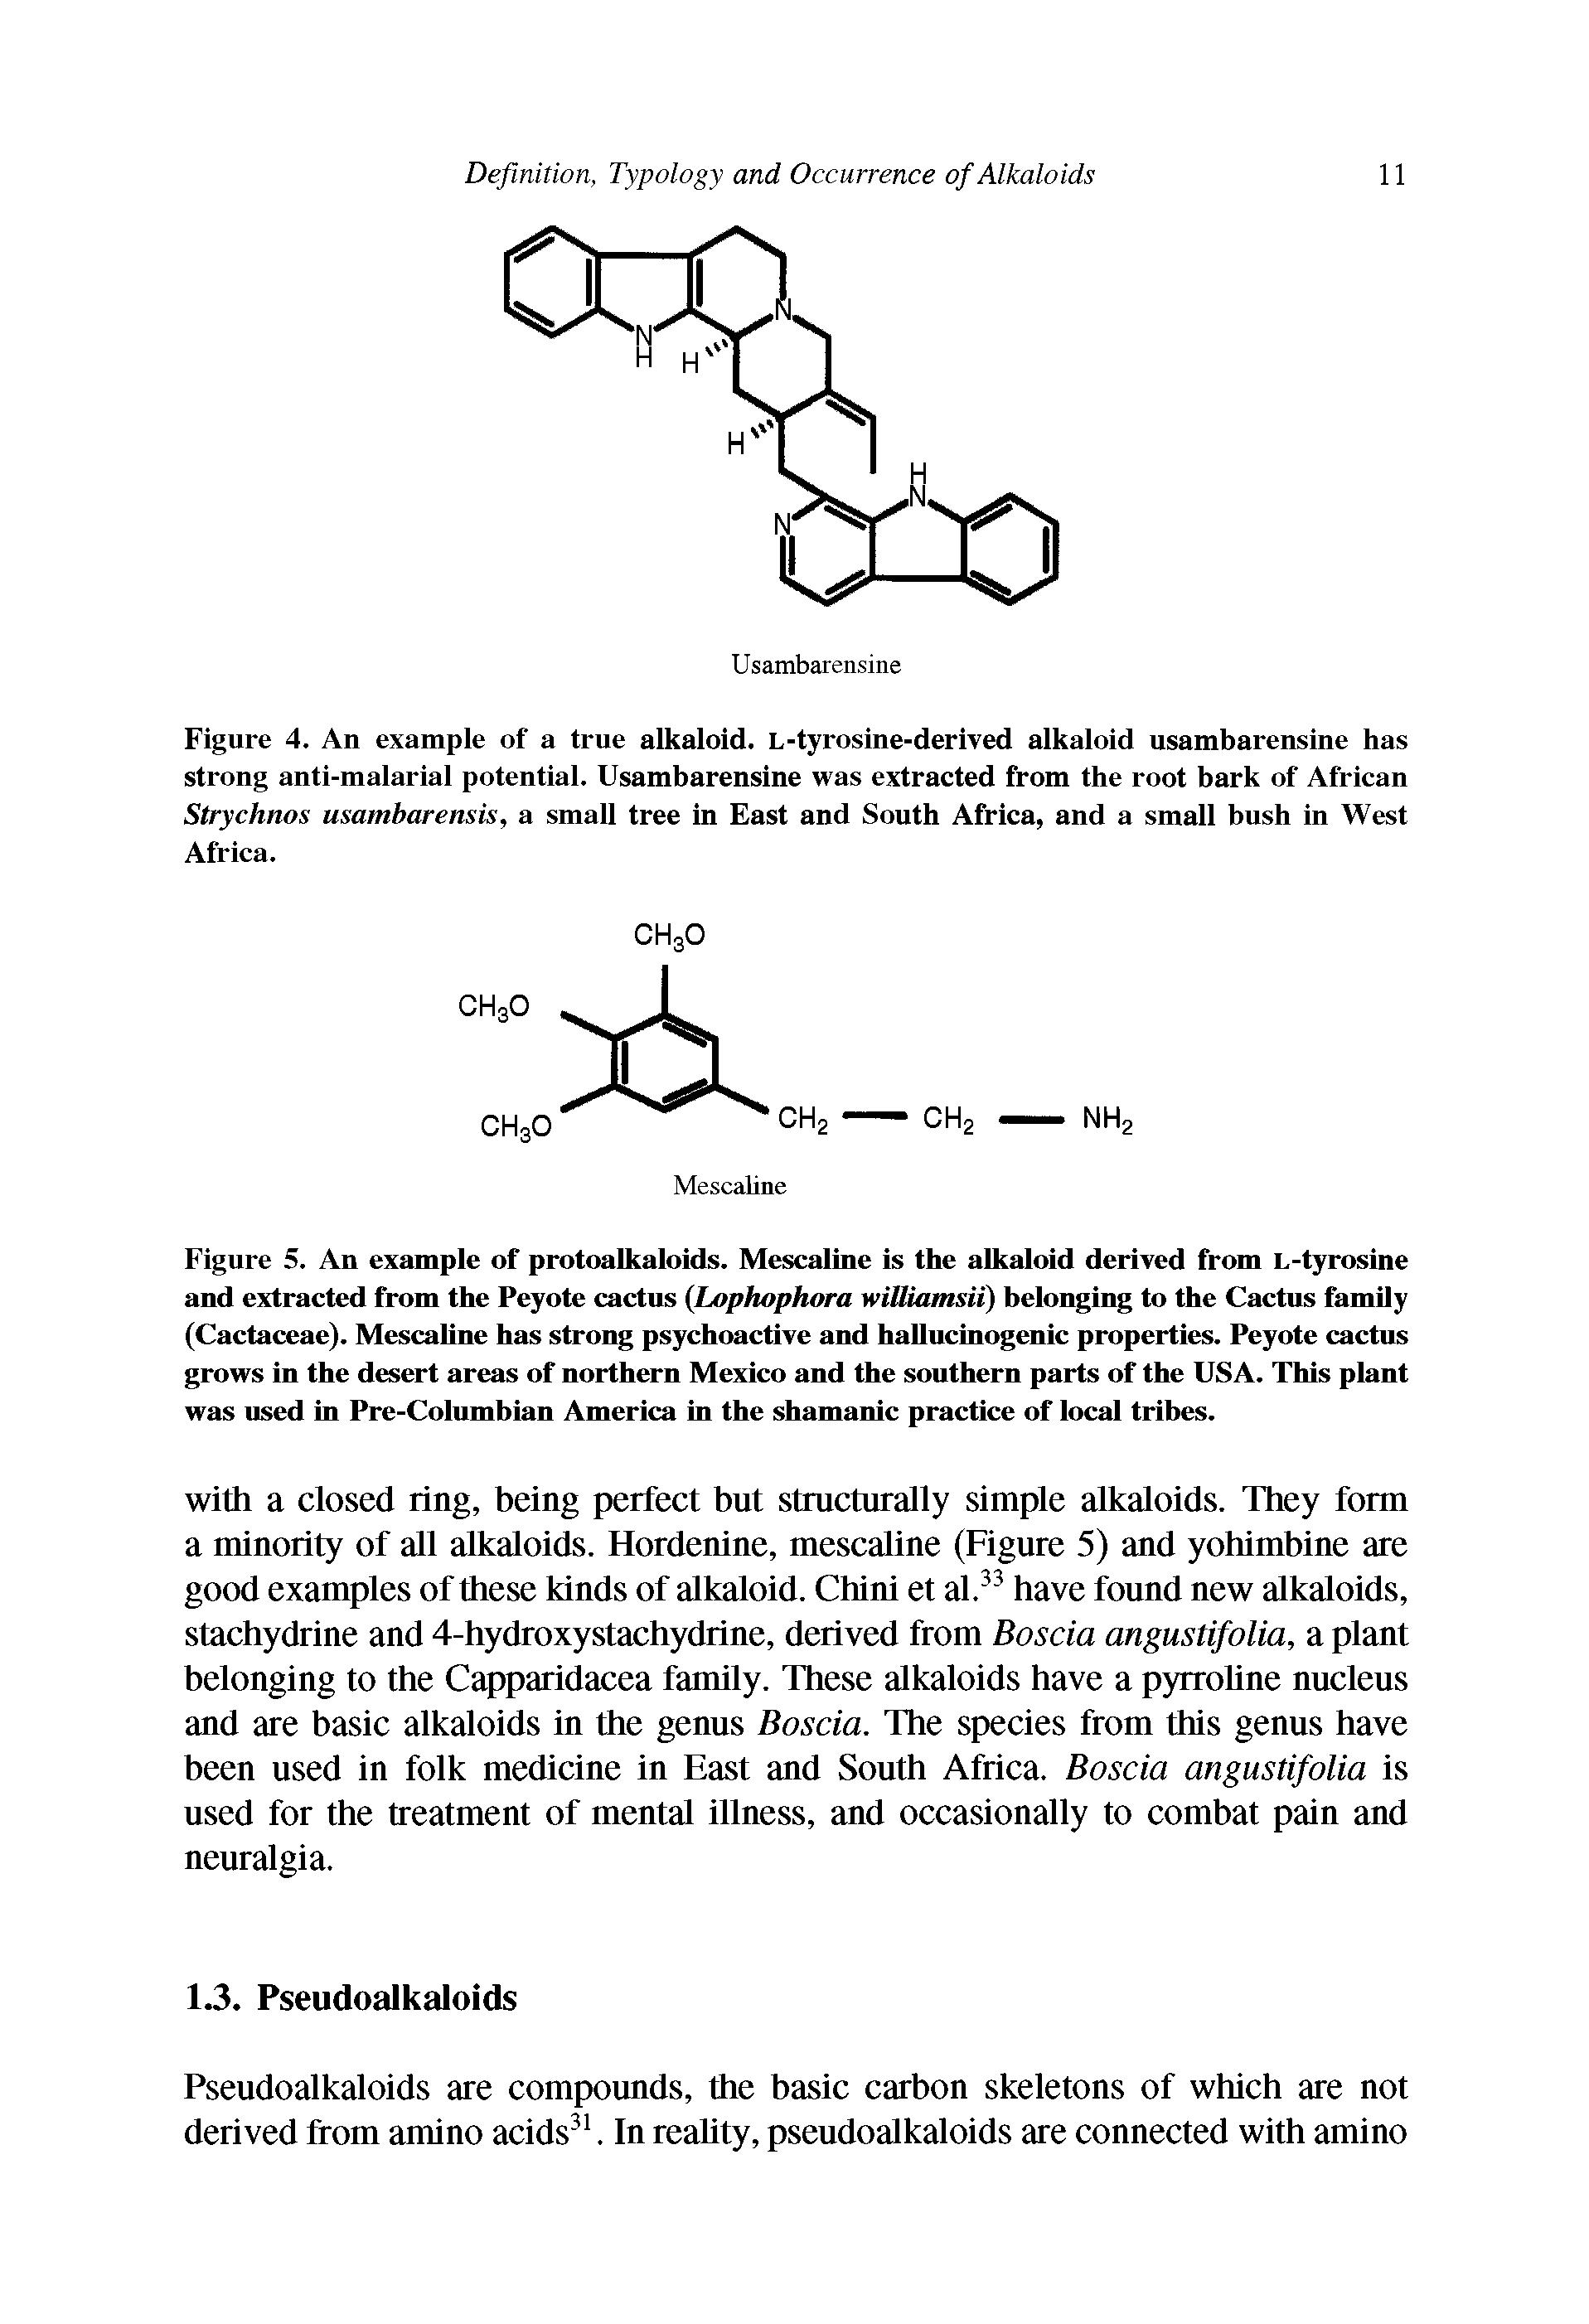 Figure 4. An example of a true alkaloid. L-tyrosine-derived alkaloid usambarensine has strong anti-malarial potential. Usambarensine was extracted from the root bark of African Strychnos usambaremis, a small tree in East and South Africa, and a small bush in West Africa.